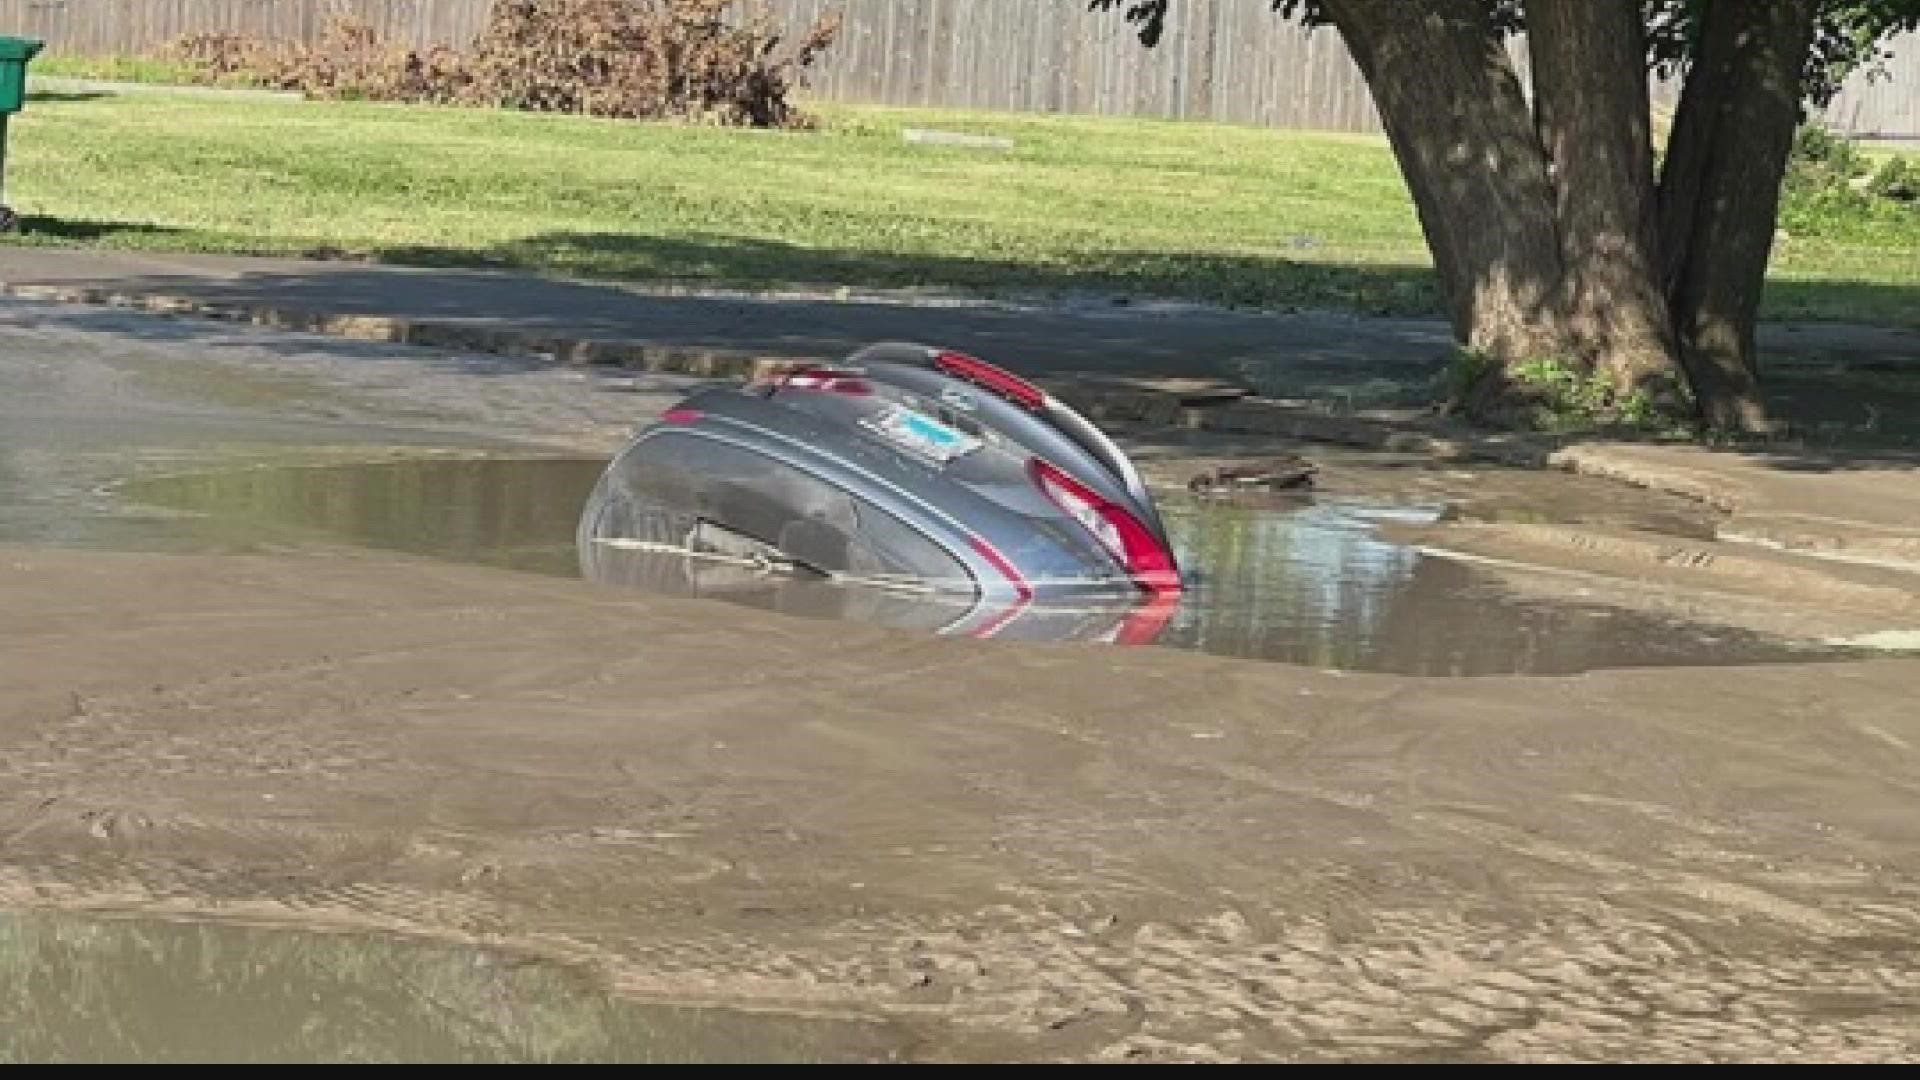 A car completely was submerged in a massive sinkhole in East Saint Louis on July 4. On Saturday, residents returned to the site to call for action on infrastructure.